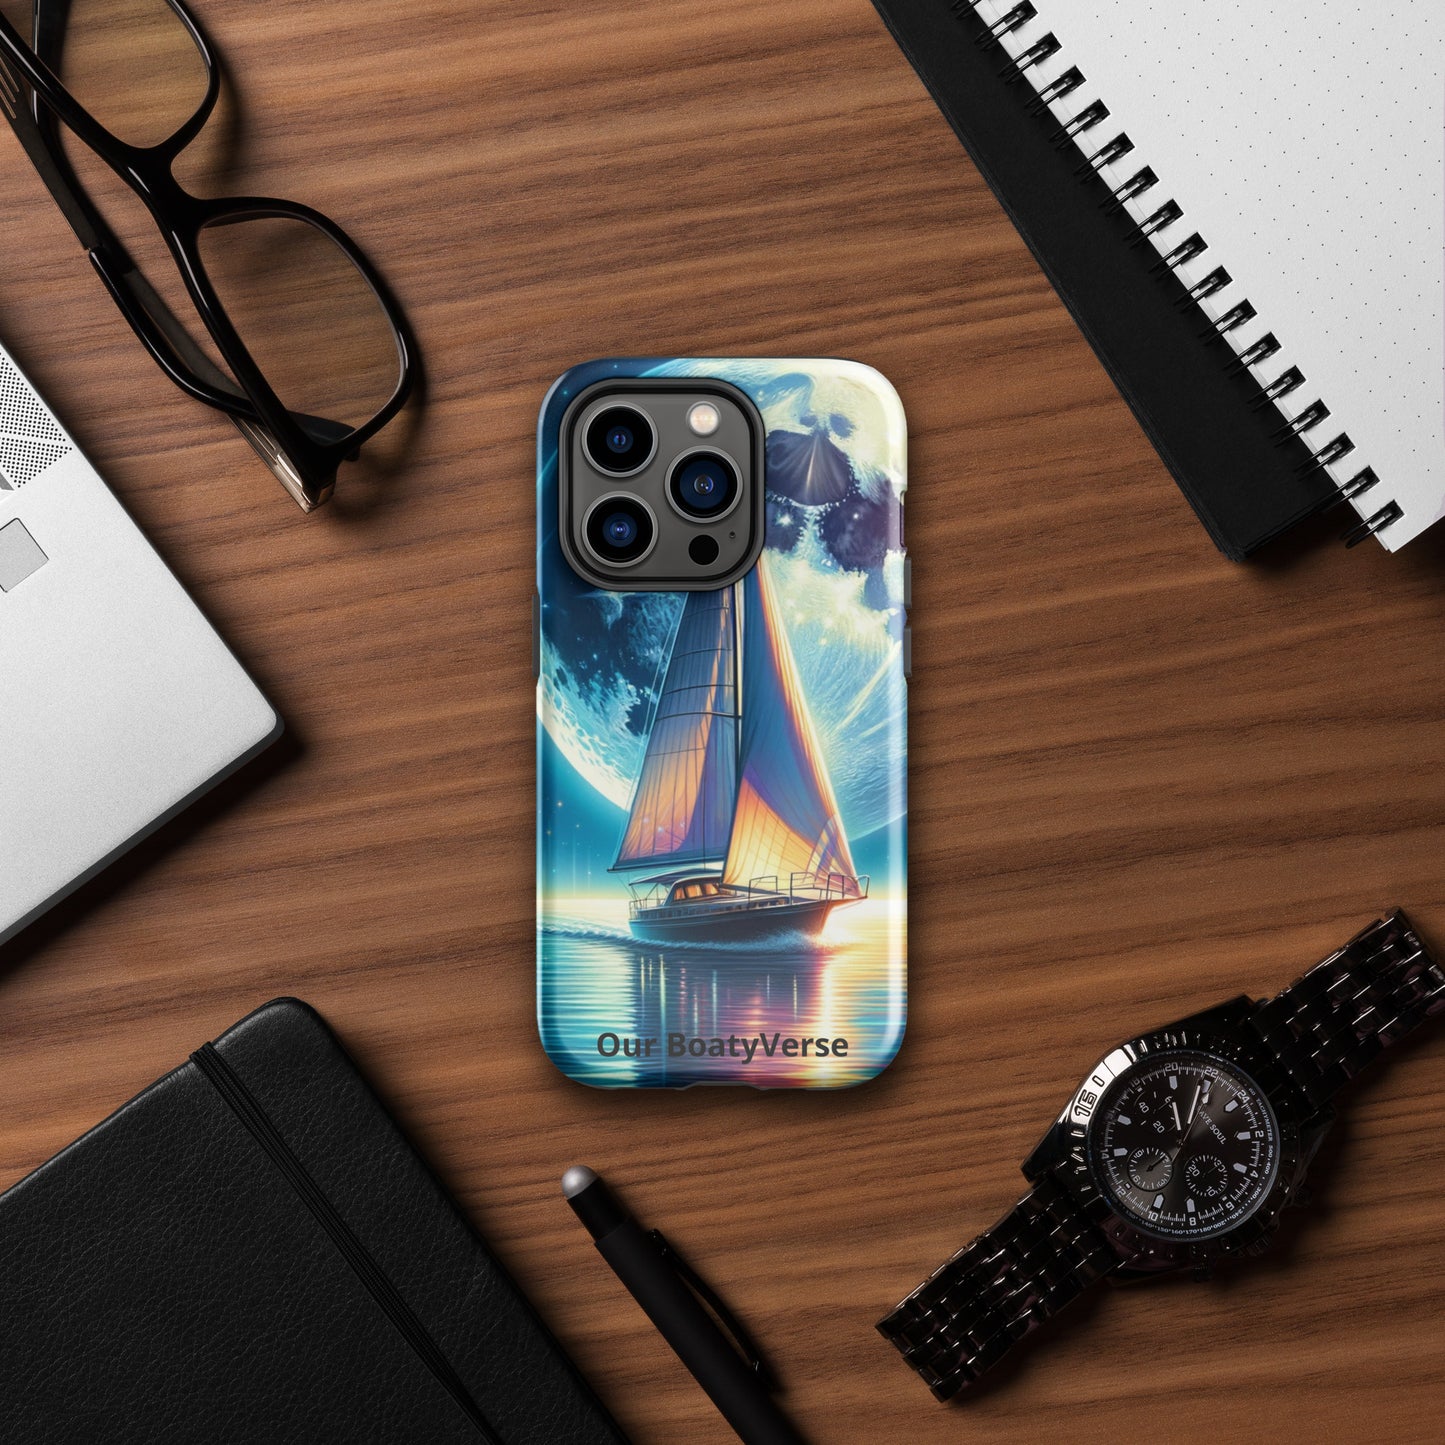 Moonlight Sailing, Tough Case for iPhone® models by Our BoatyVerse